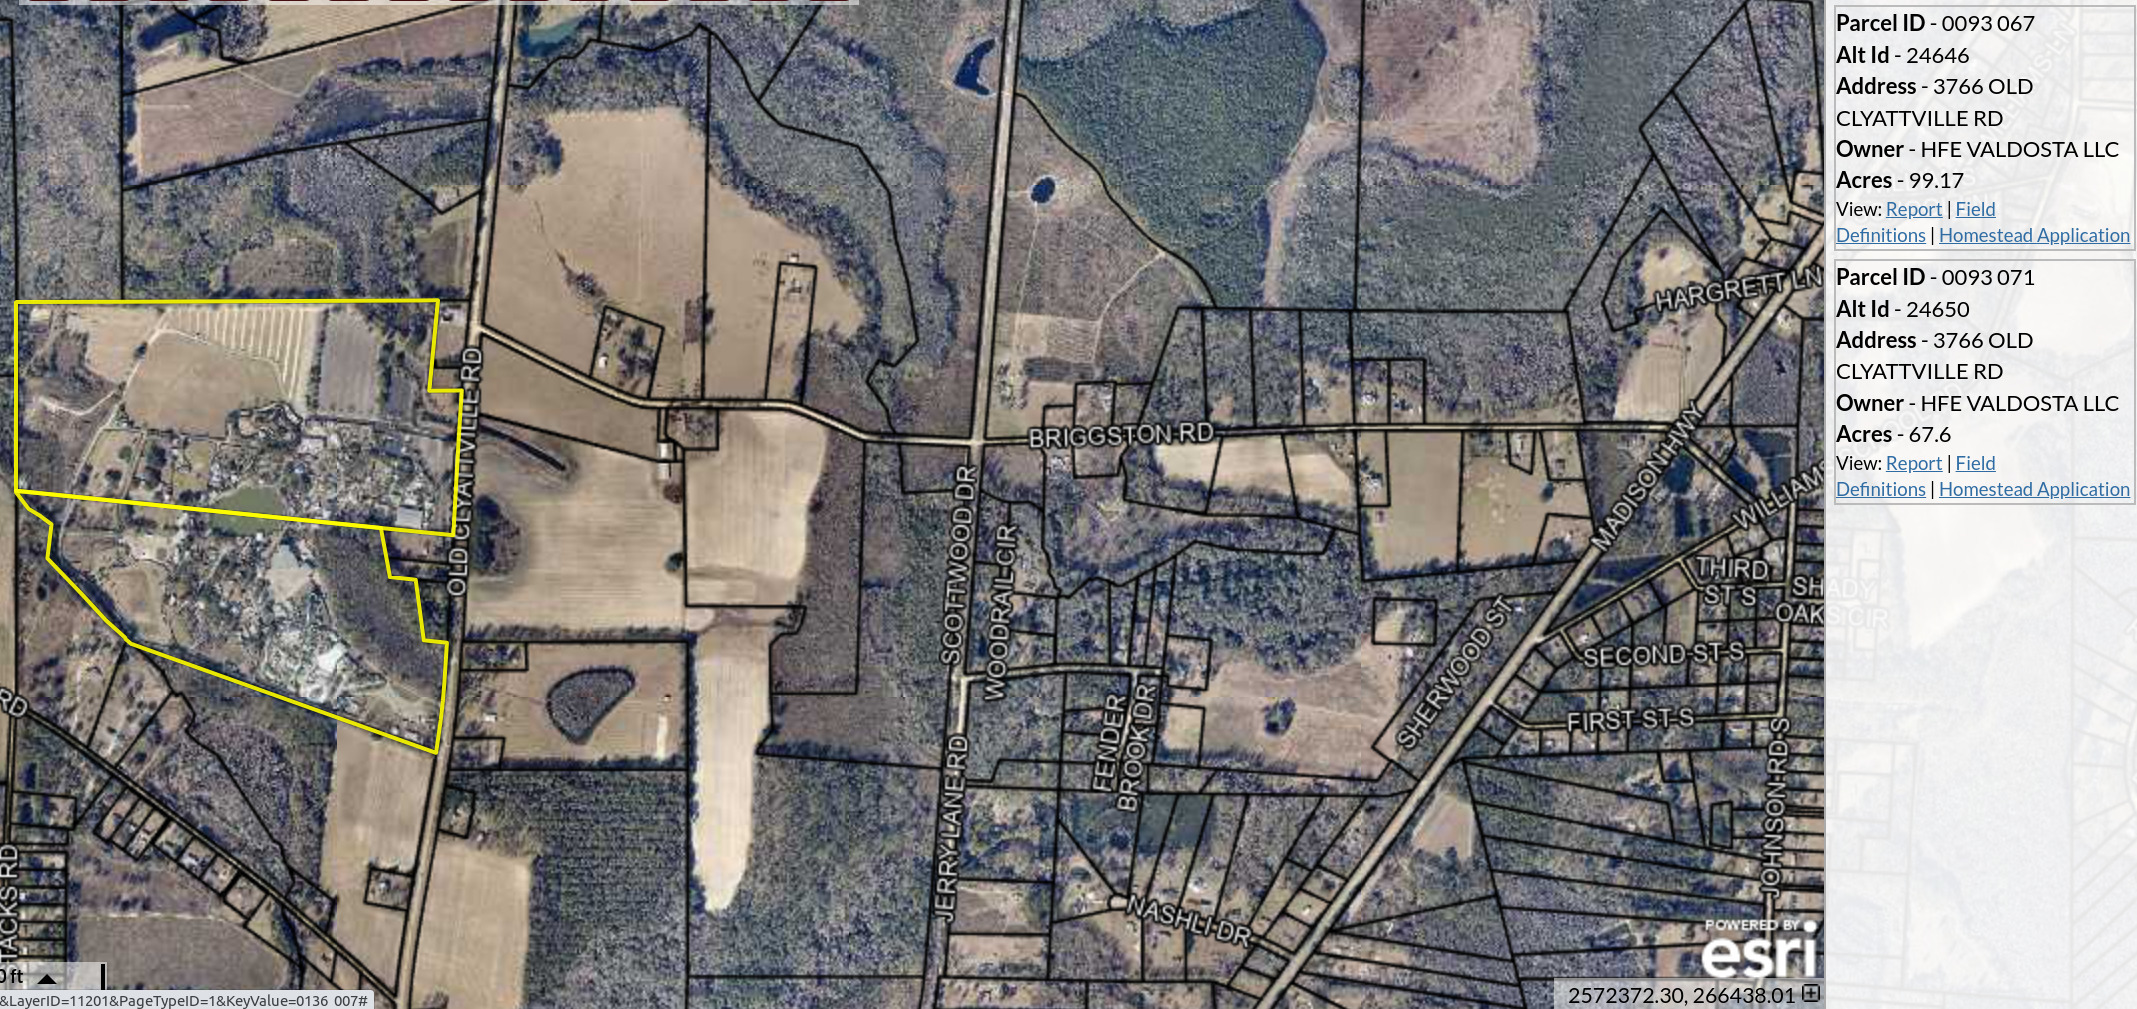 Map: Wild Adventures and Briggston Road in Lowndes County Tax Assessors Map